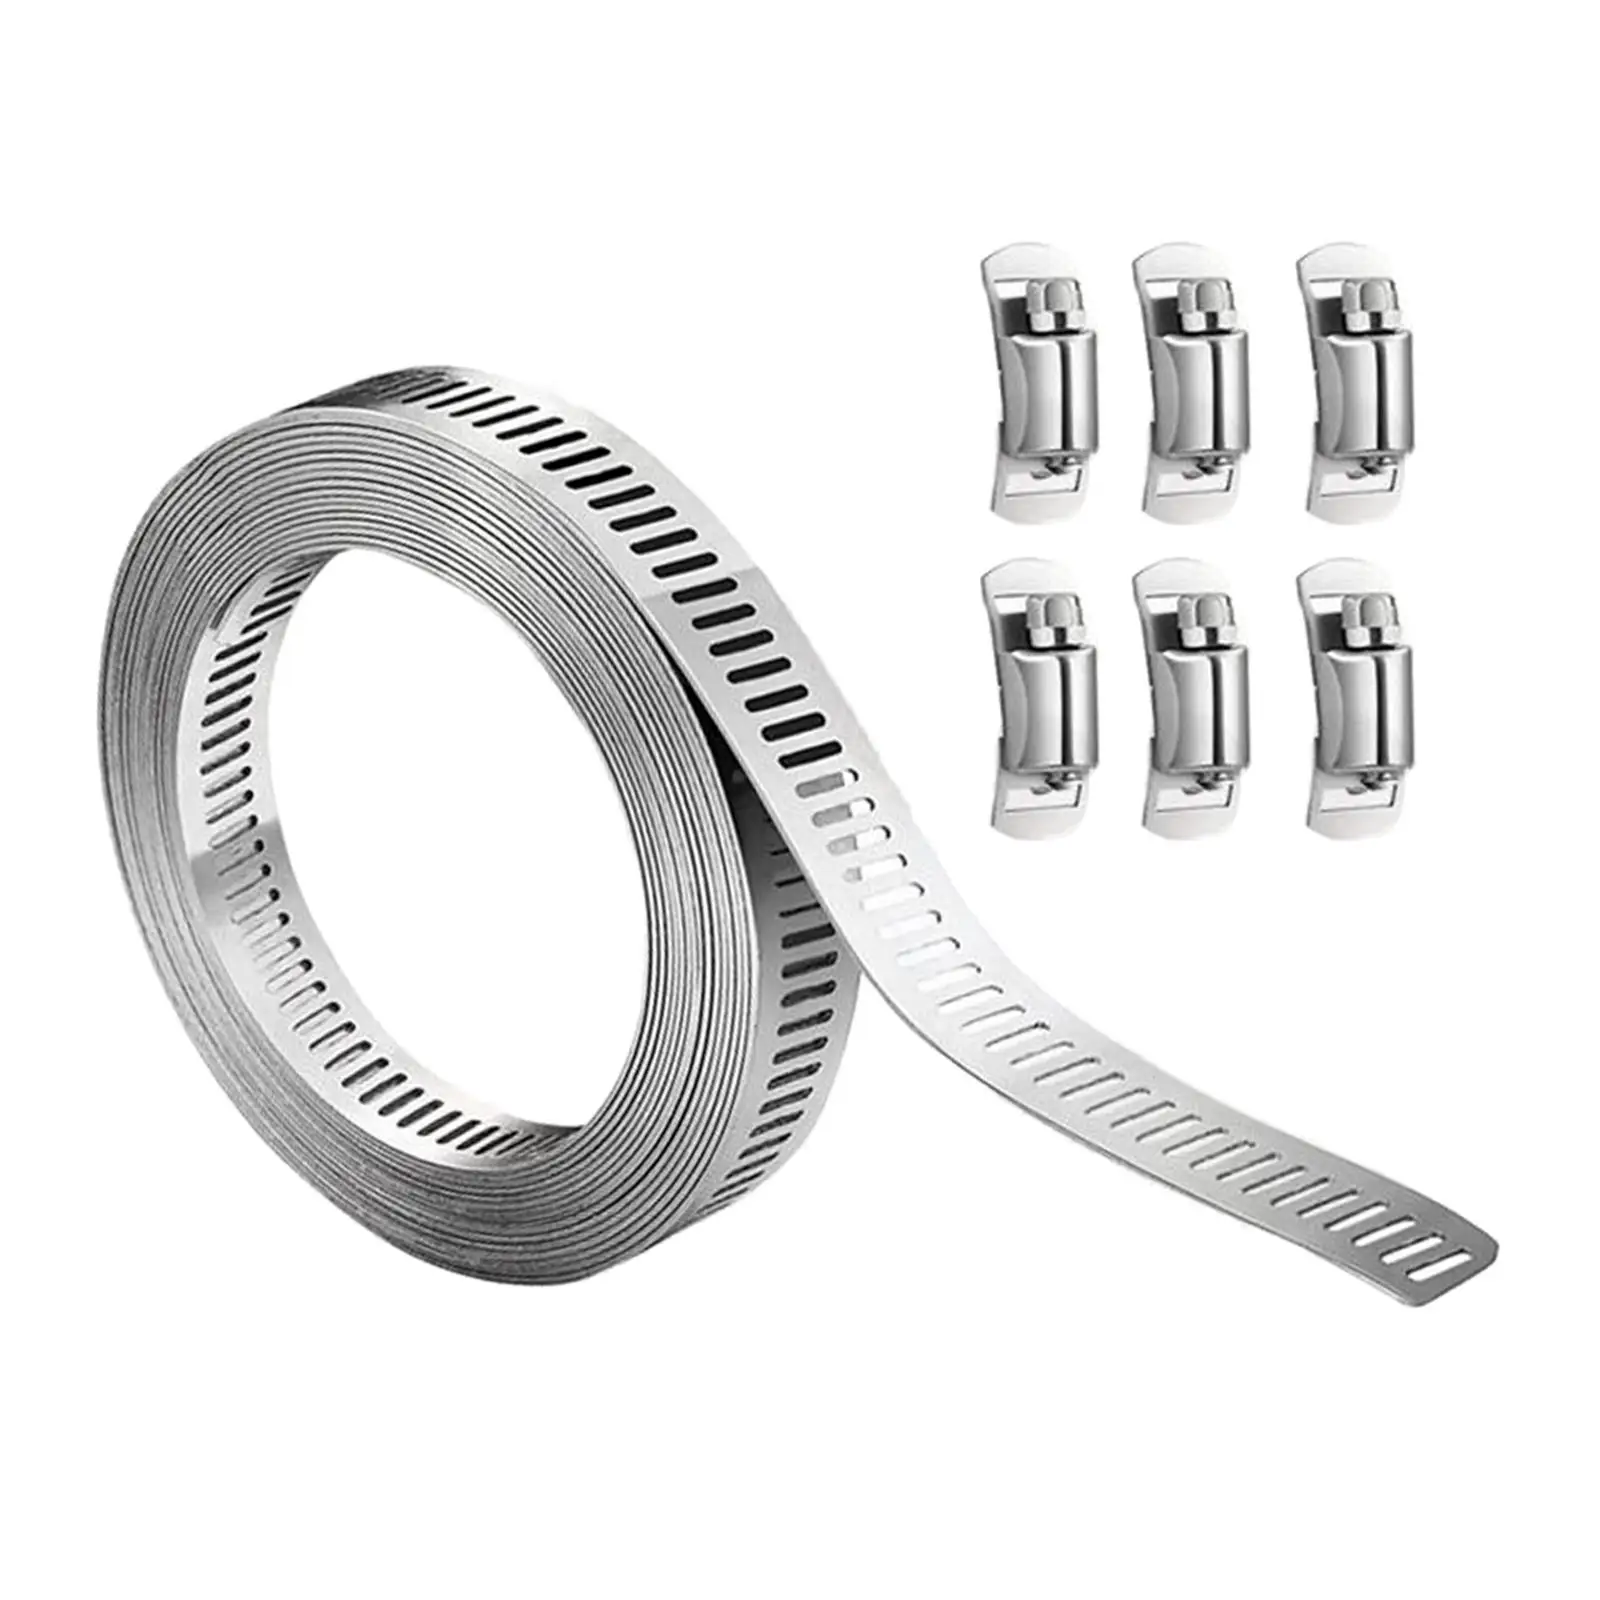 Hose Clamp Adjustable with 8Pcs Fasteners assortment kits Waterproof Ducting Clamp Worm Gear Hose Clamp for Water Pipe Machinery